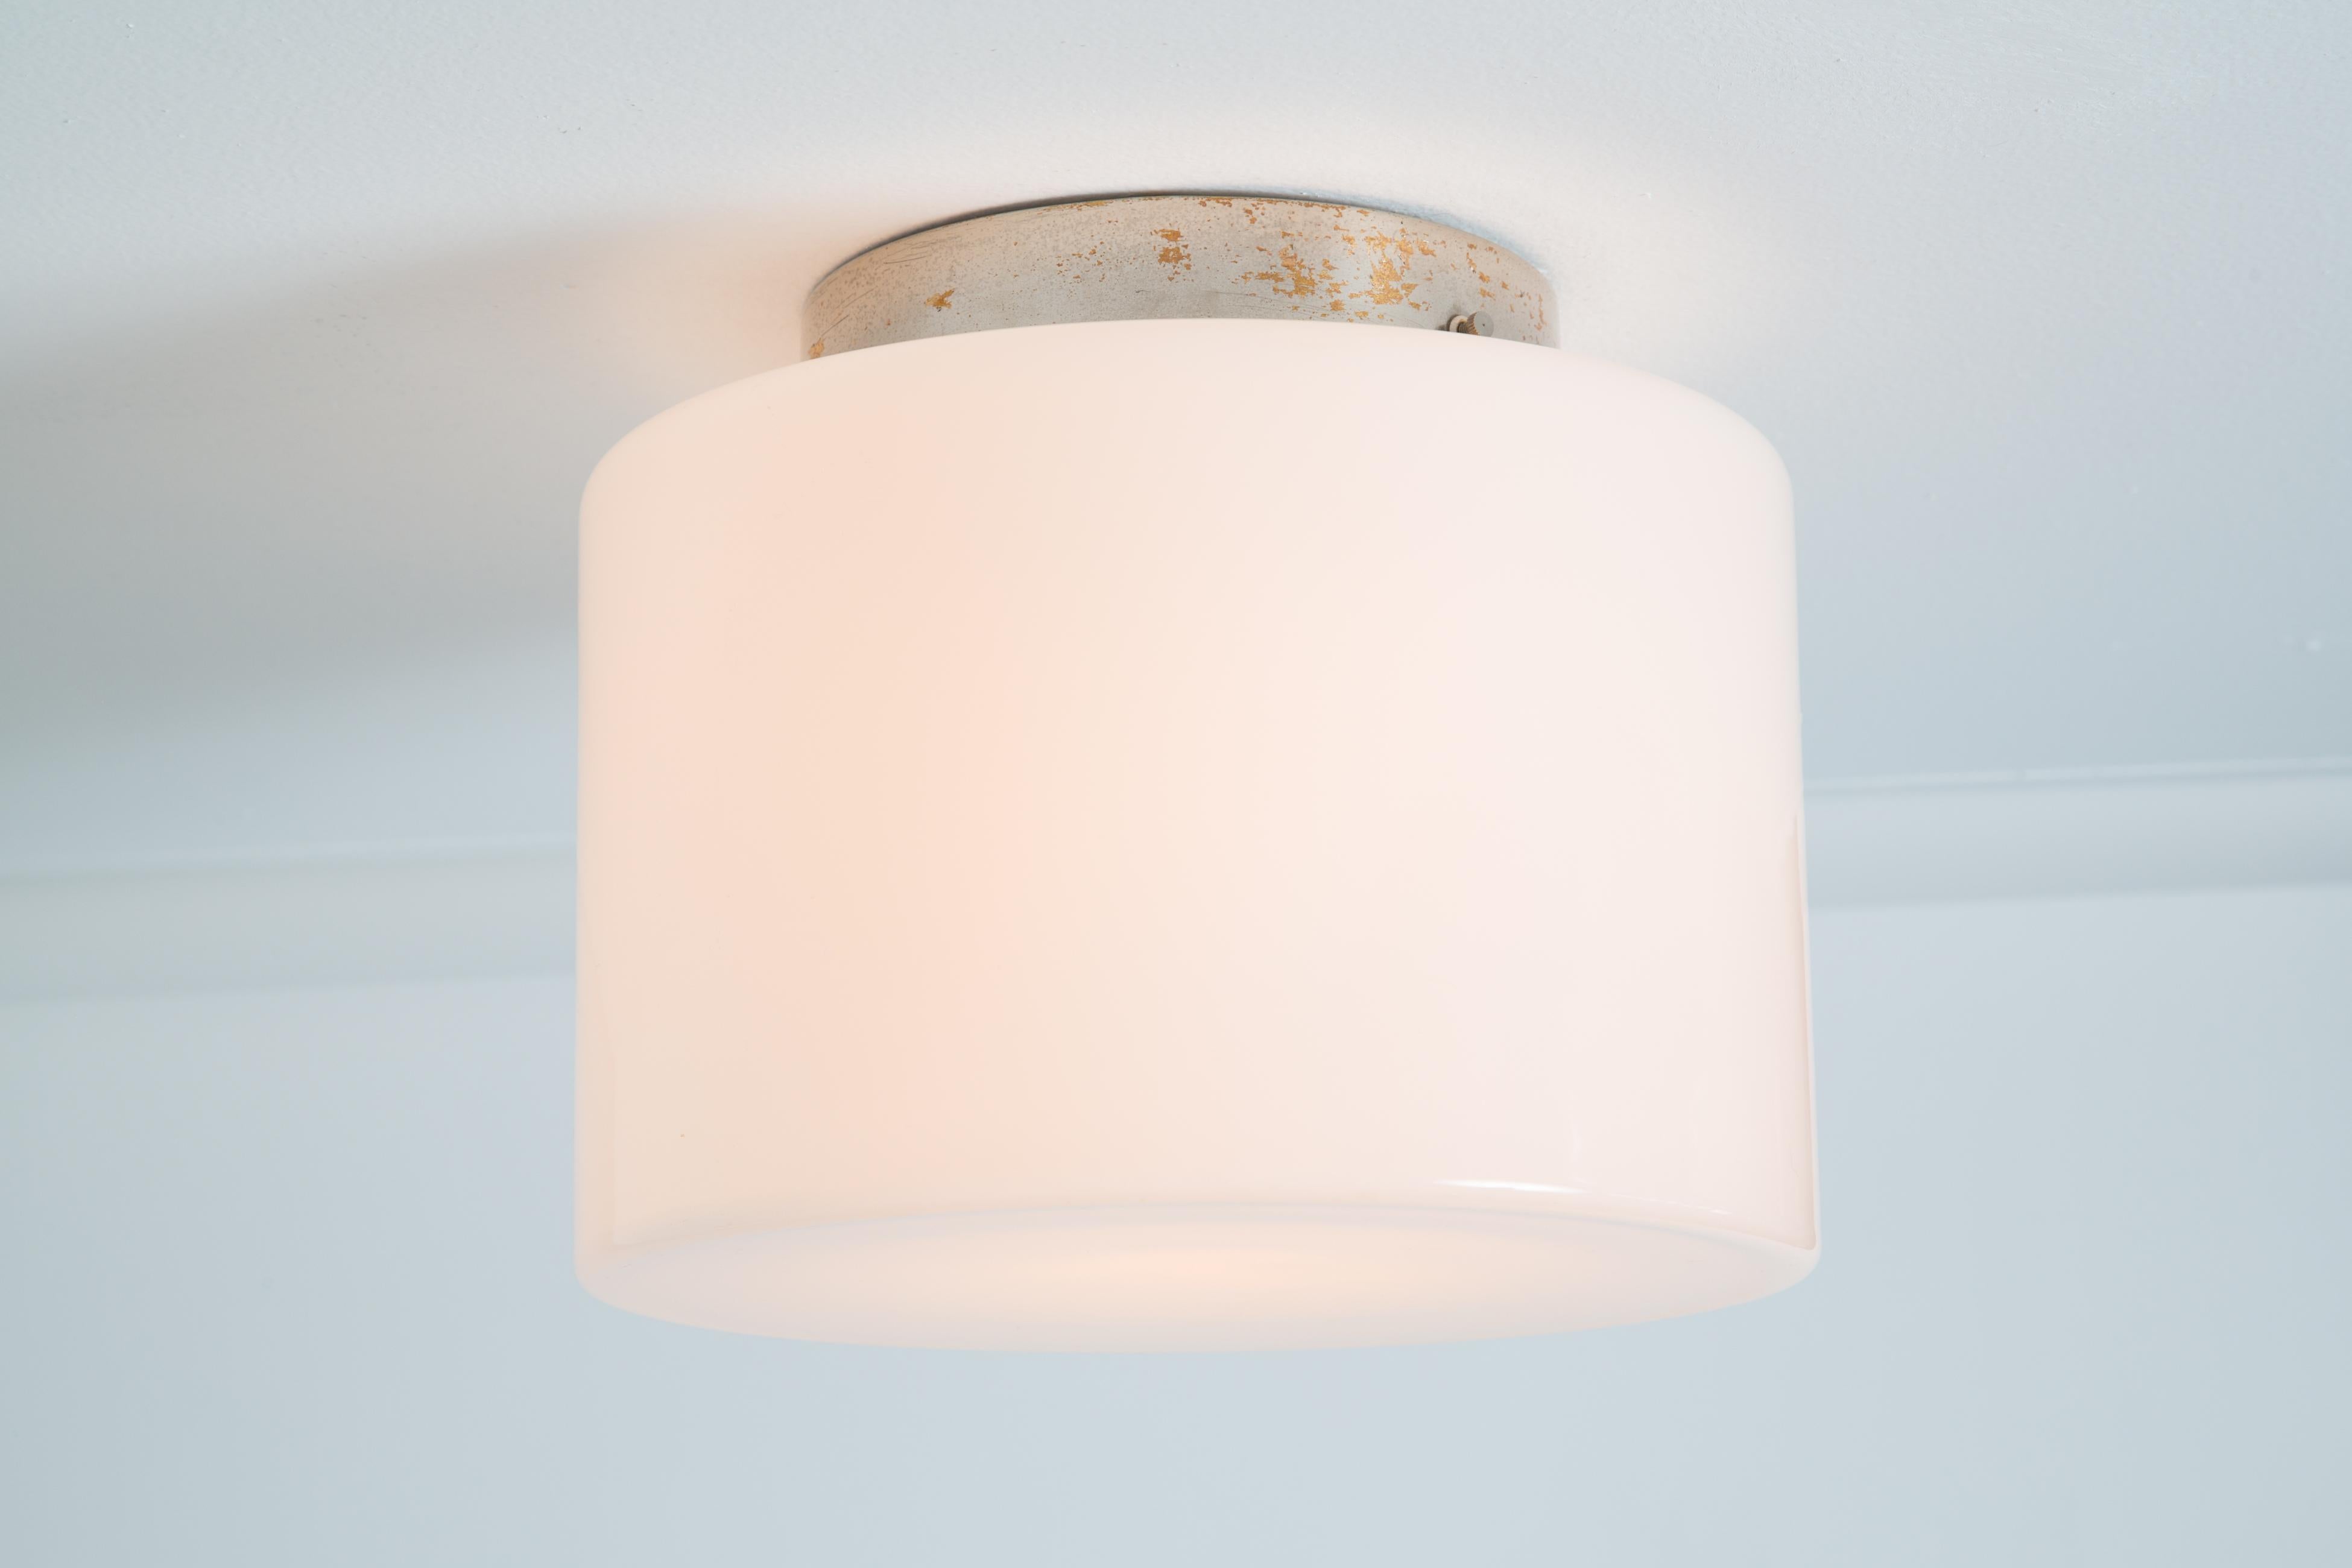 1940s Paavo Tynell Model #2024 glass & metal flush mount for Taito Oy. This rare and exceptional flush mount is executed in white opaline glass and metal. Manufactured by Taito in the late 1940s, this is a fine unsigned example of a Tynell's iconic